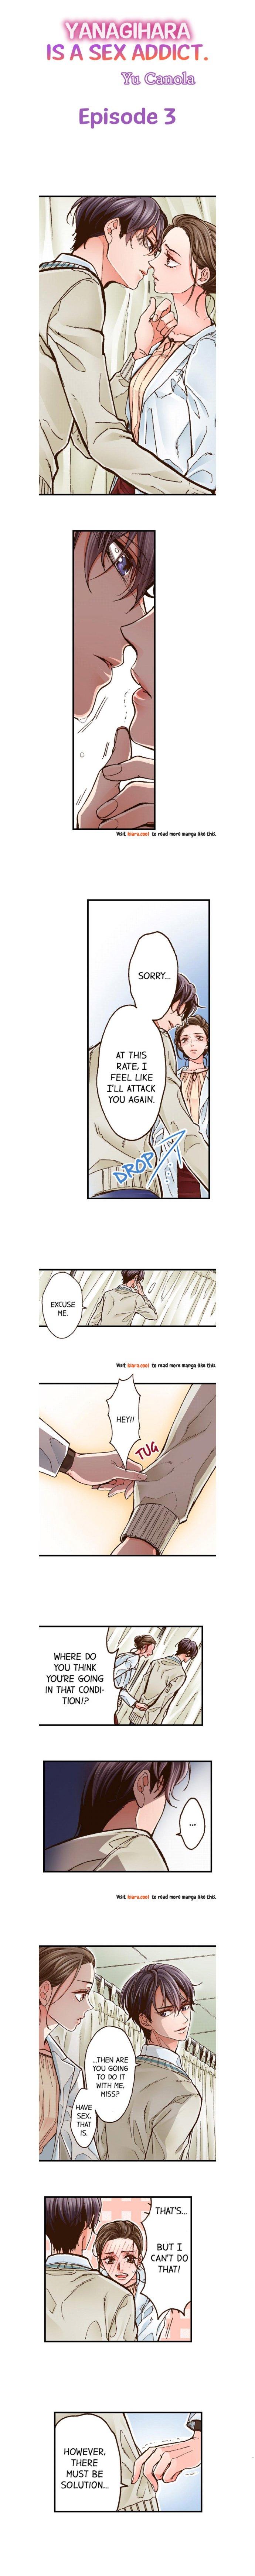 Yanagihara Is a Sex Addict. - Chapter 3 Page 1